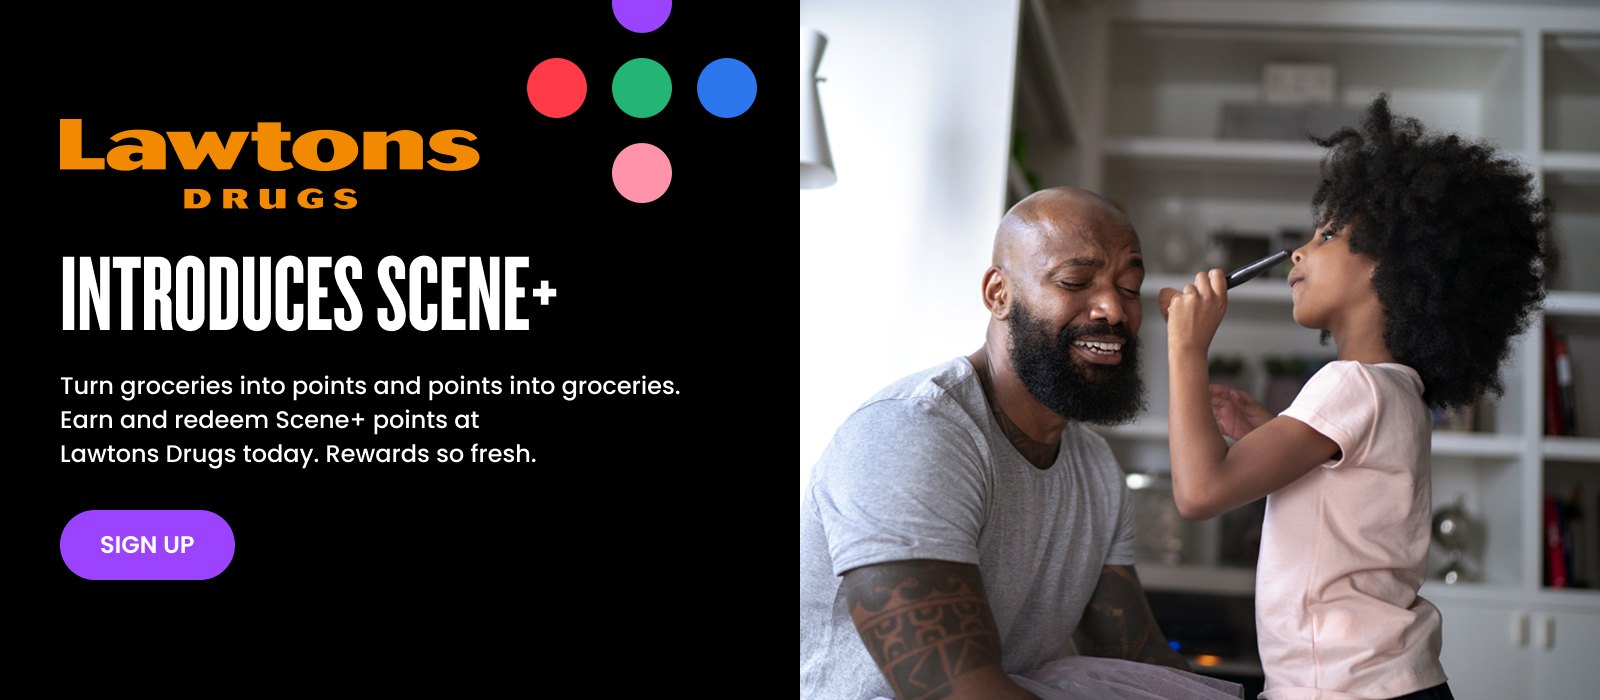 Text Reading 'Lawtons Drugs introduces Scene+ Turn purchases into points and points into purchases. Earn and redeem Scene+ points at Lawtons Drugs today. Rewards so fresh. Press 'Sign Up' button to avail benefits on ELM'.